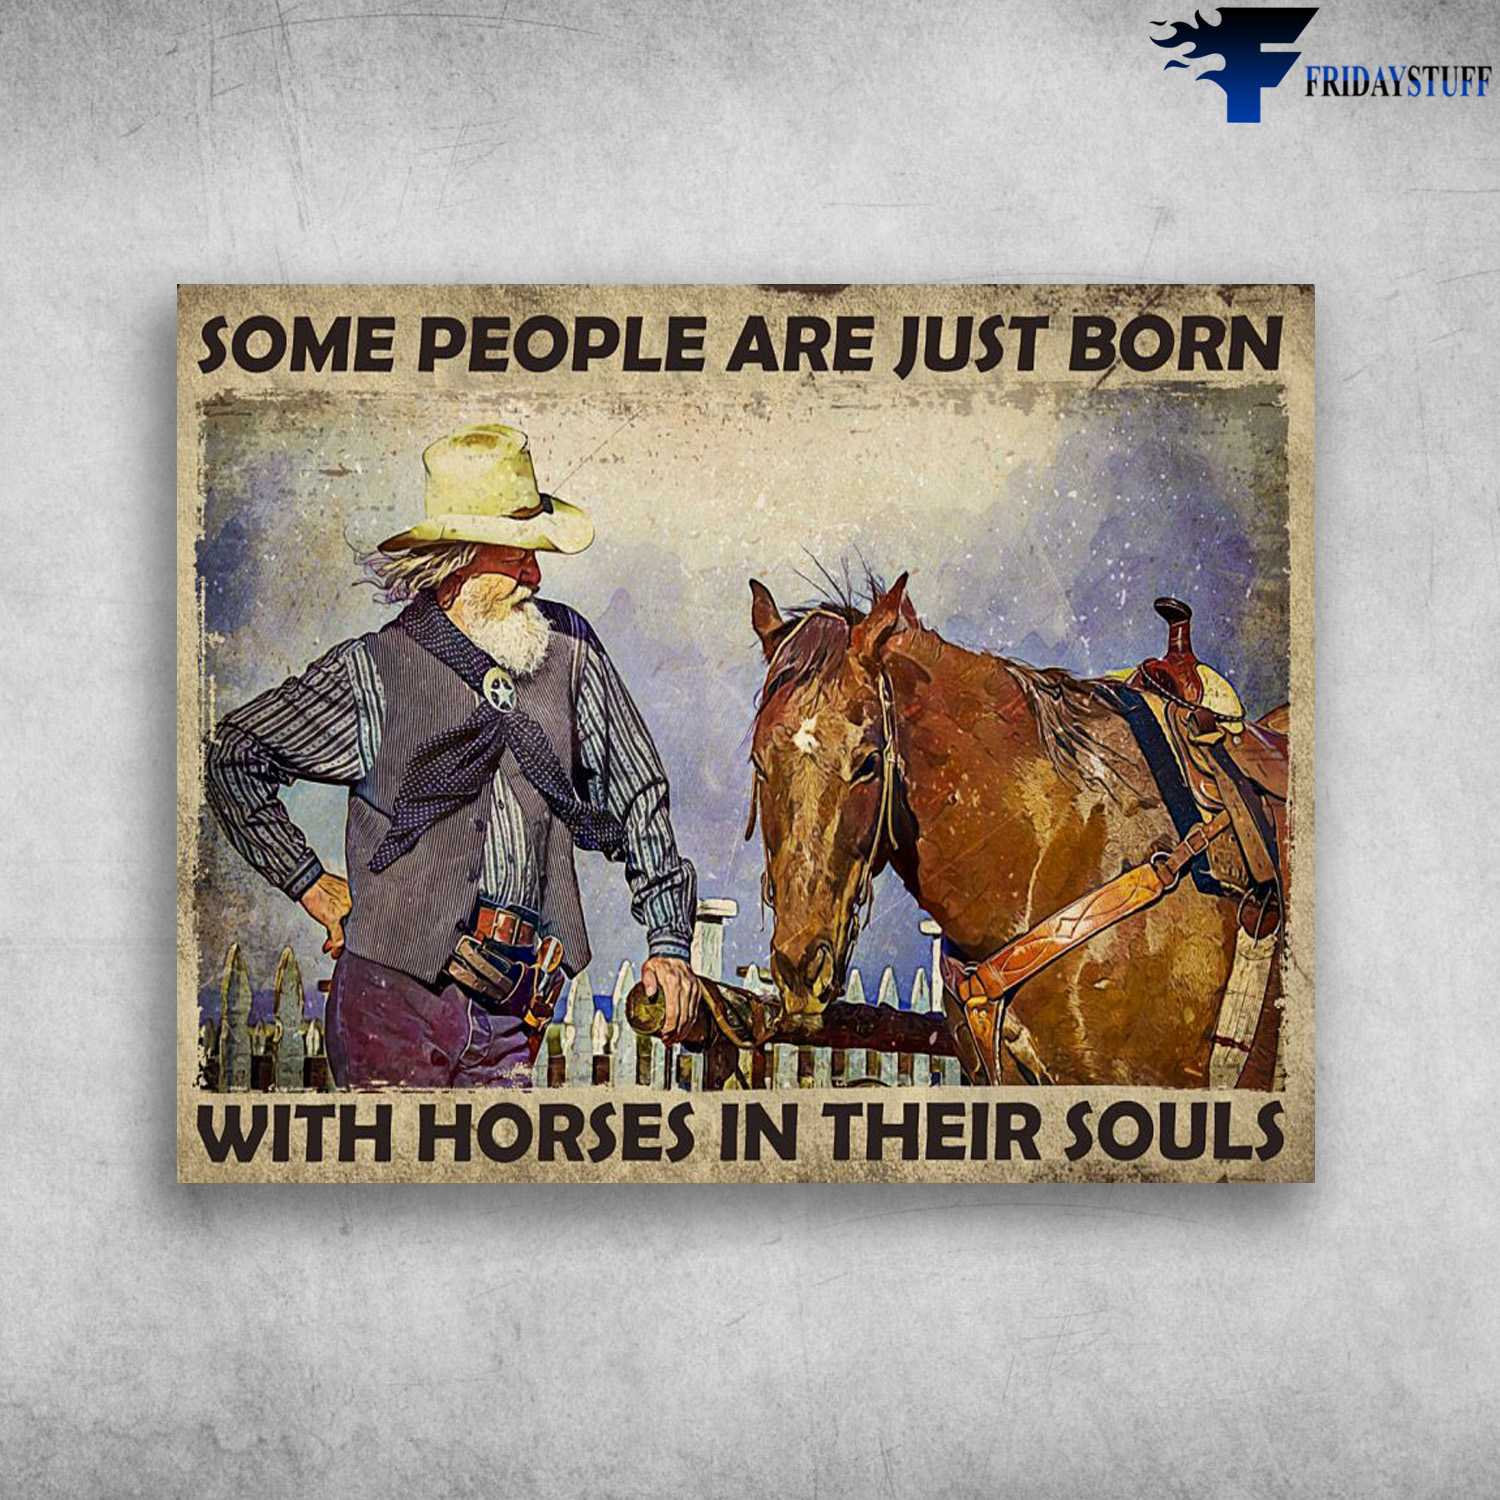 Old Man Riding, Old Cowboy, Some People Are Just Born, With Horses In Their Souls